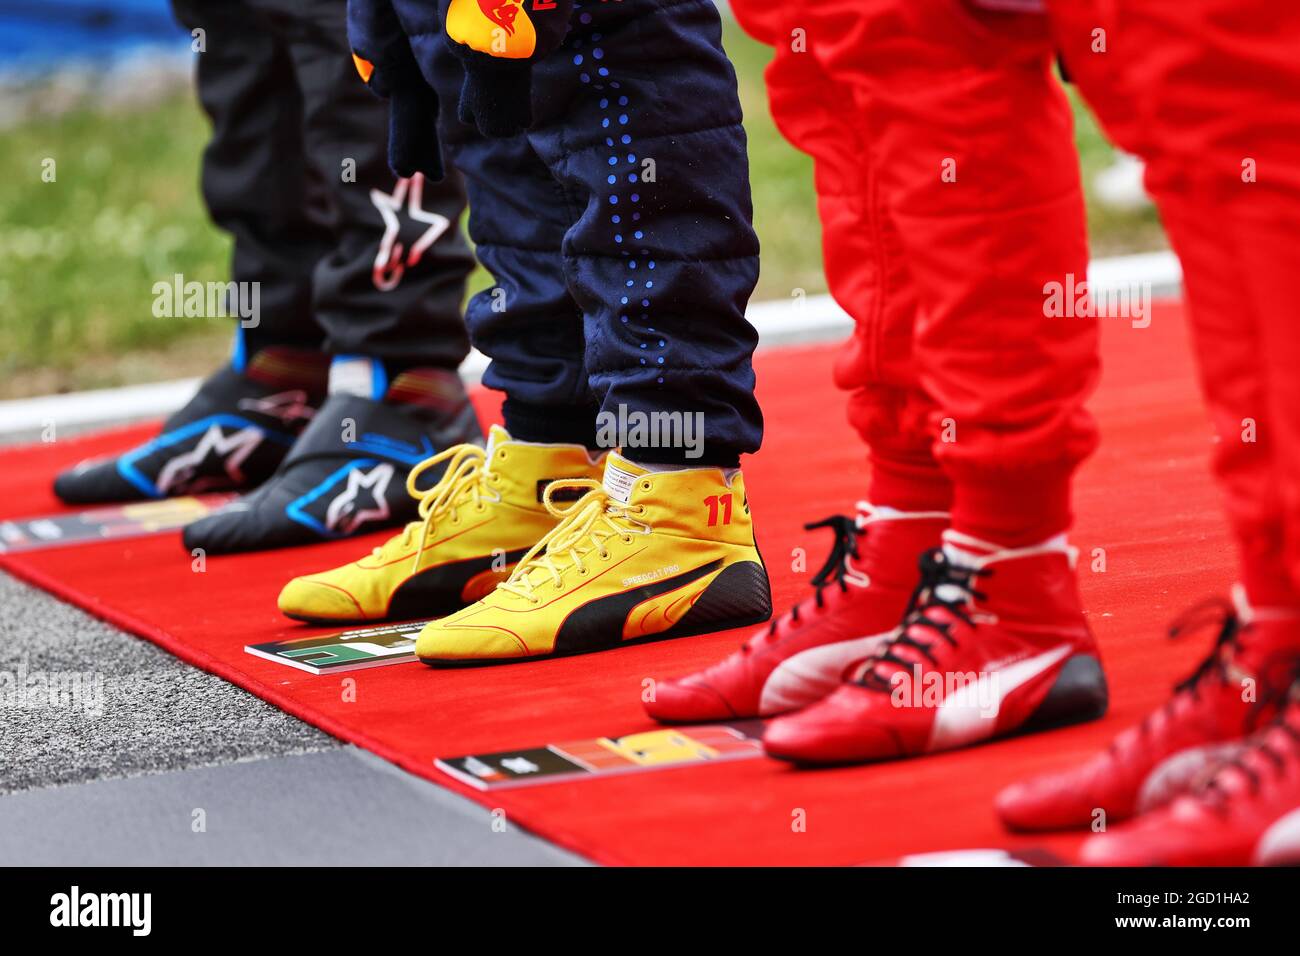 Sergio Perez (MEX) Red Bull Racing RB16B - racing boots - on the grid. Spanish Grand Prix, Sunday 9th May 2021. Barcelona, Spain. Stock Photo